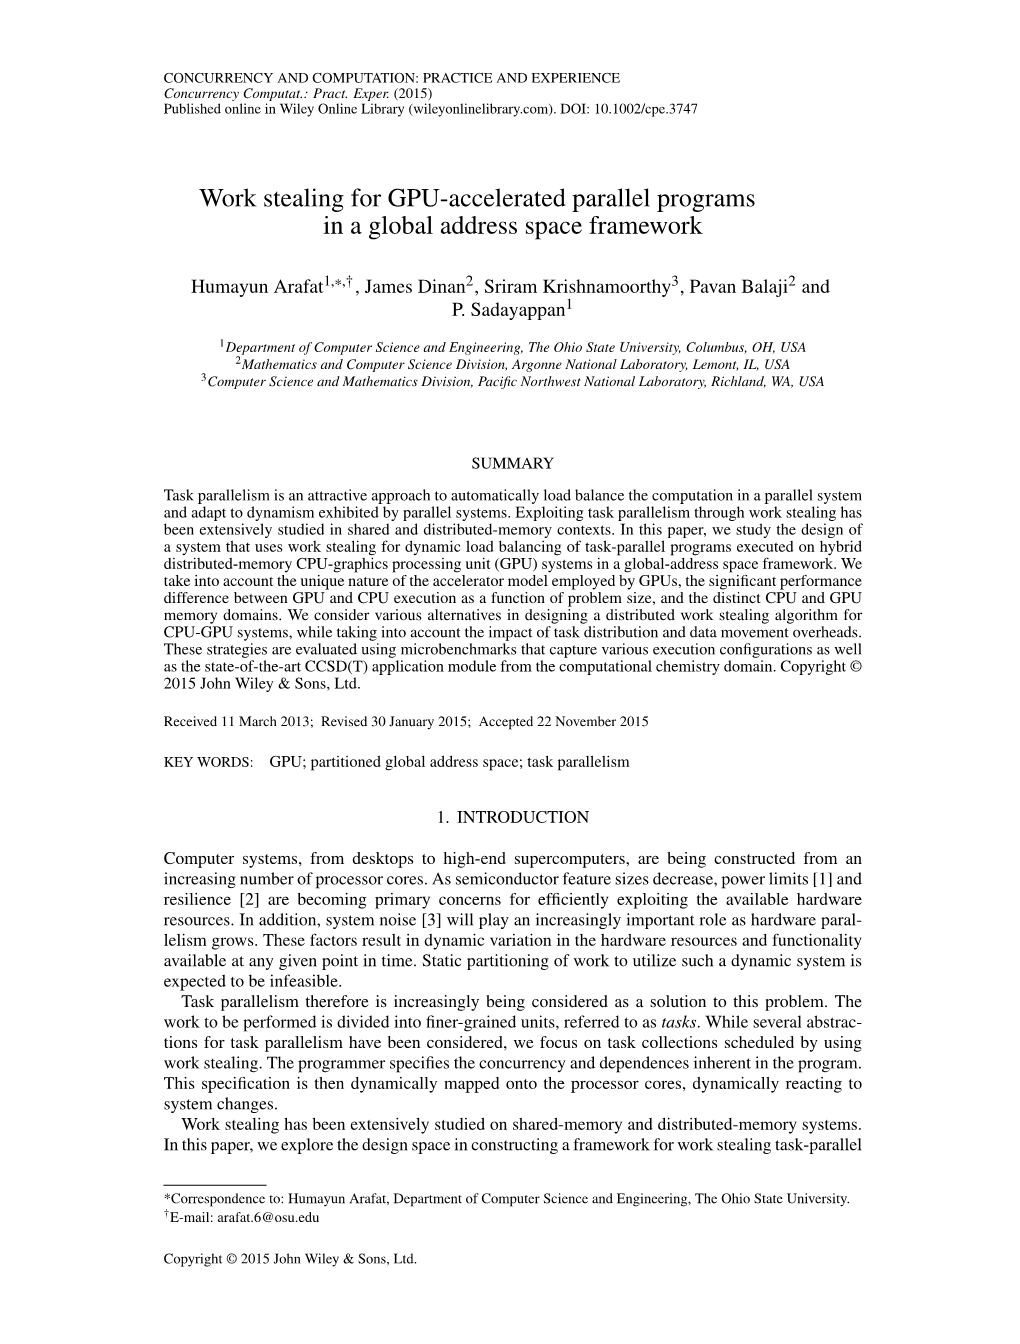 Work Stealing for GPU-Accelerated Parallel Programs in a Global Address Space Framework